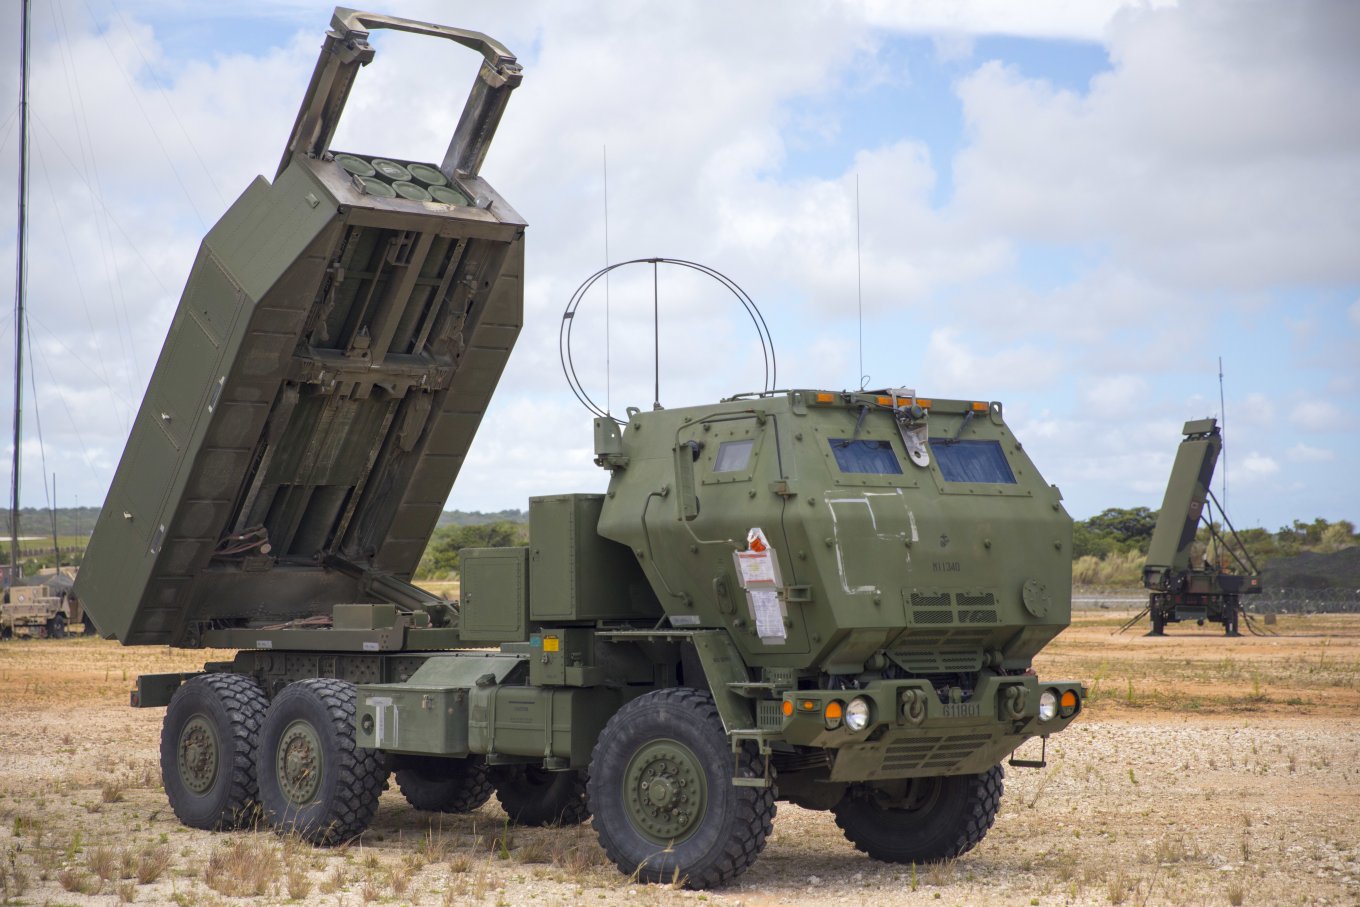 U.S. Give 4 More HIMARS Systems, Ukraine Needs 100 to Offence, Defense Express